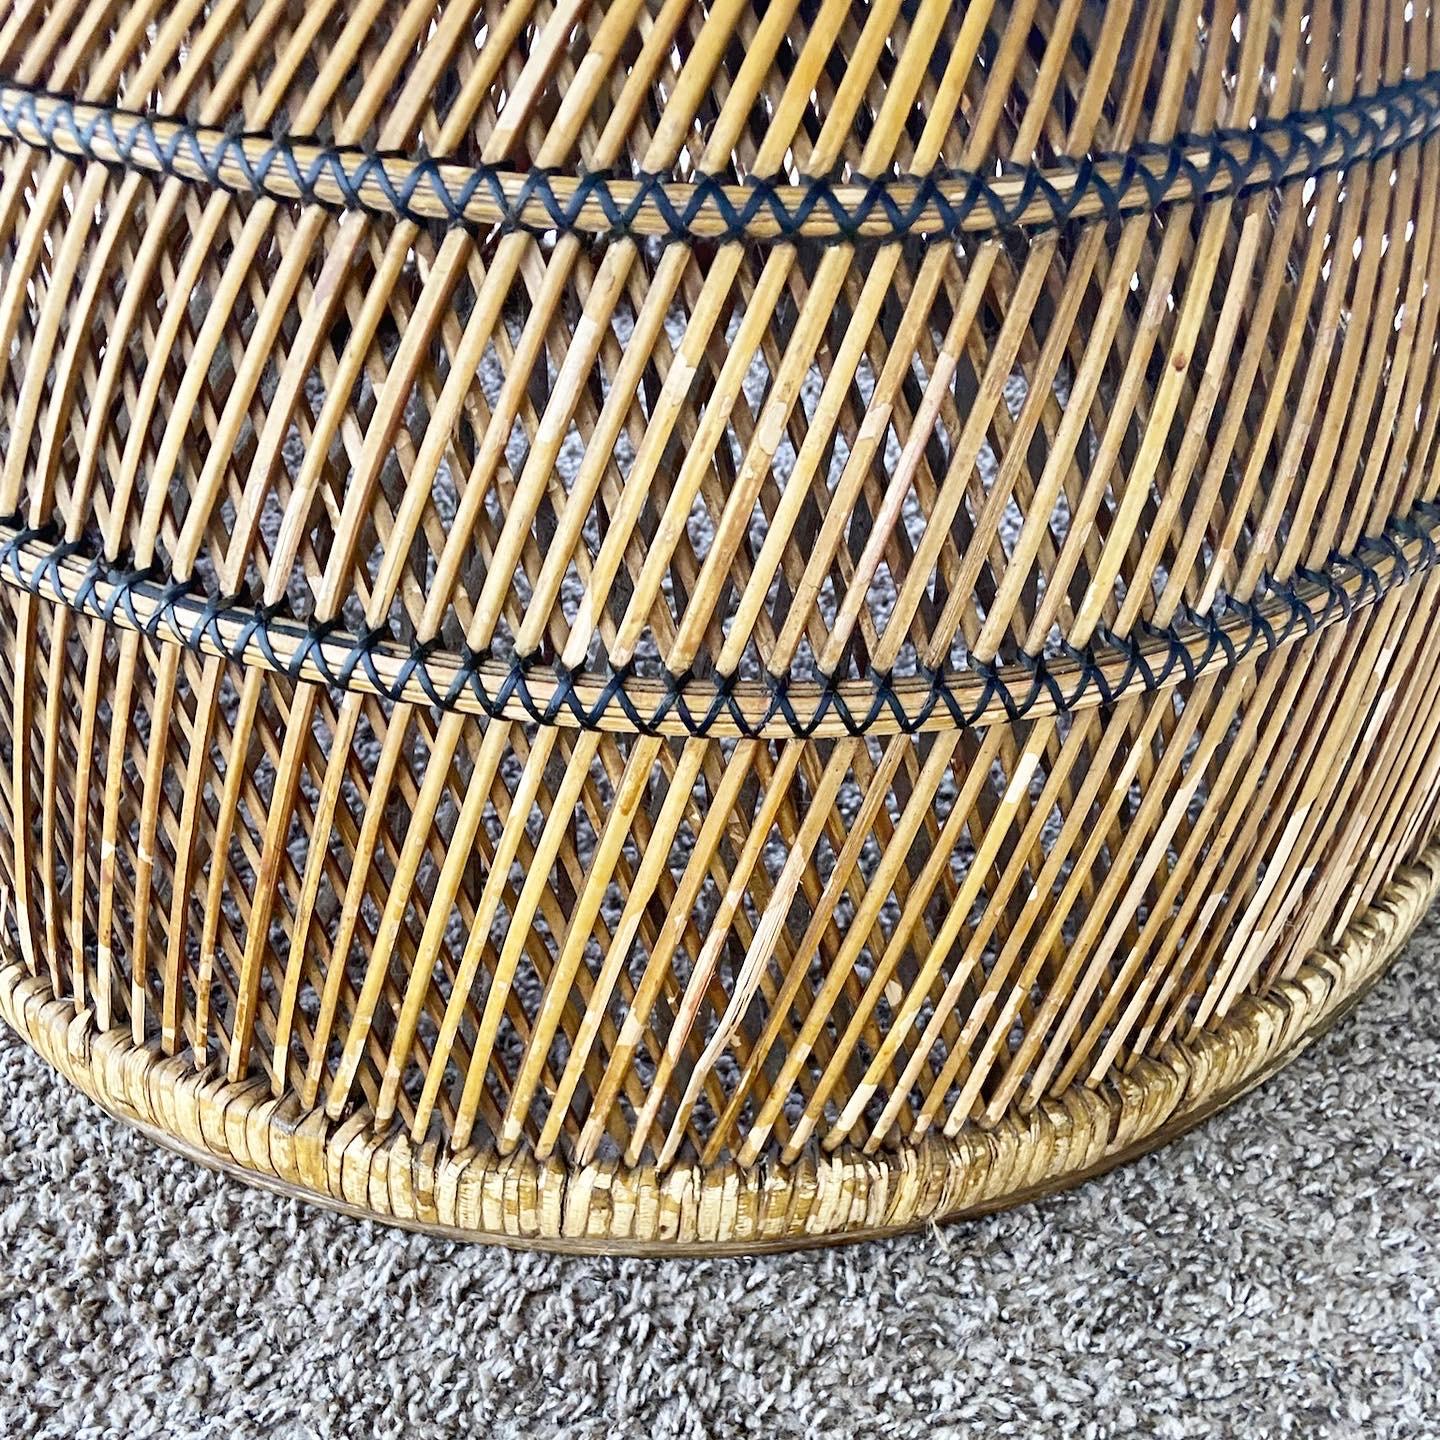 Boho Chic Buri Rattan Woven Dining Table With Glass Top For Sale 2